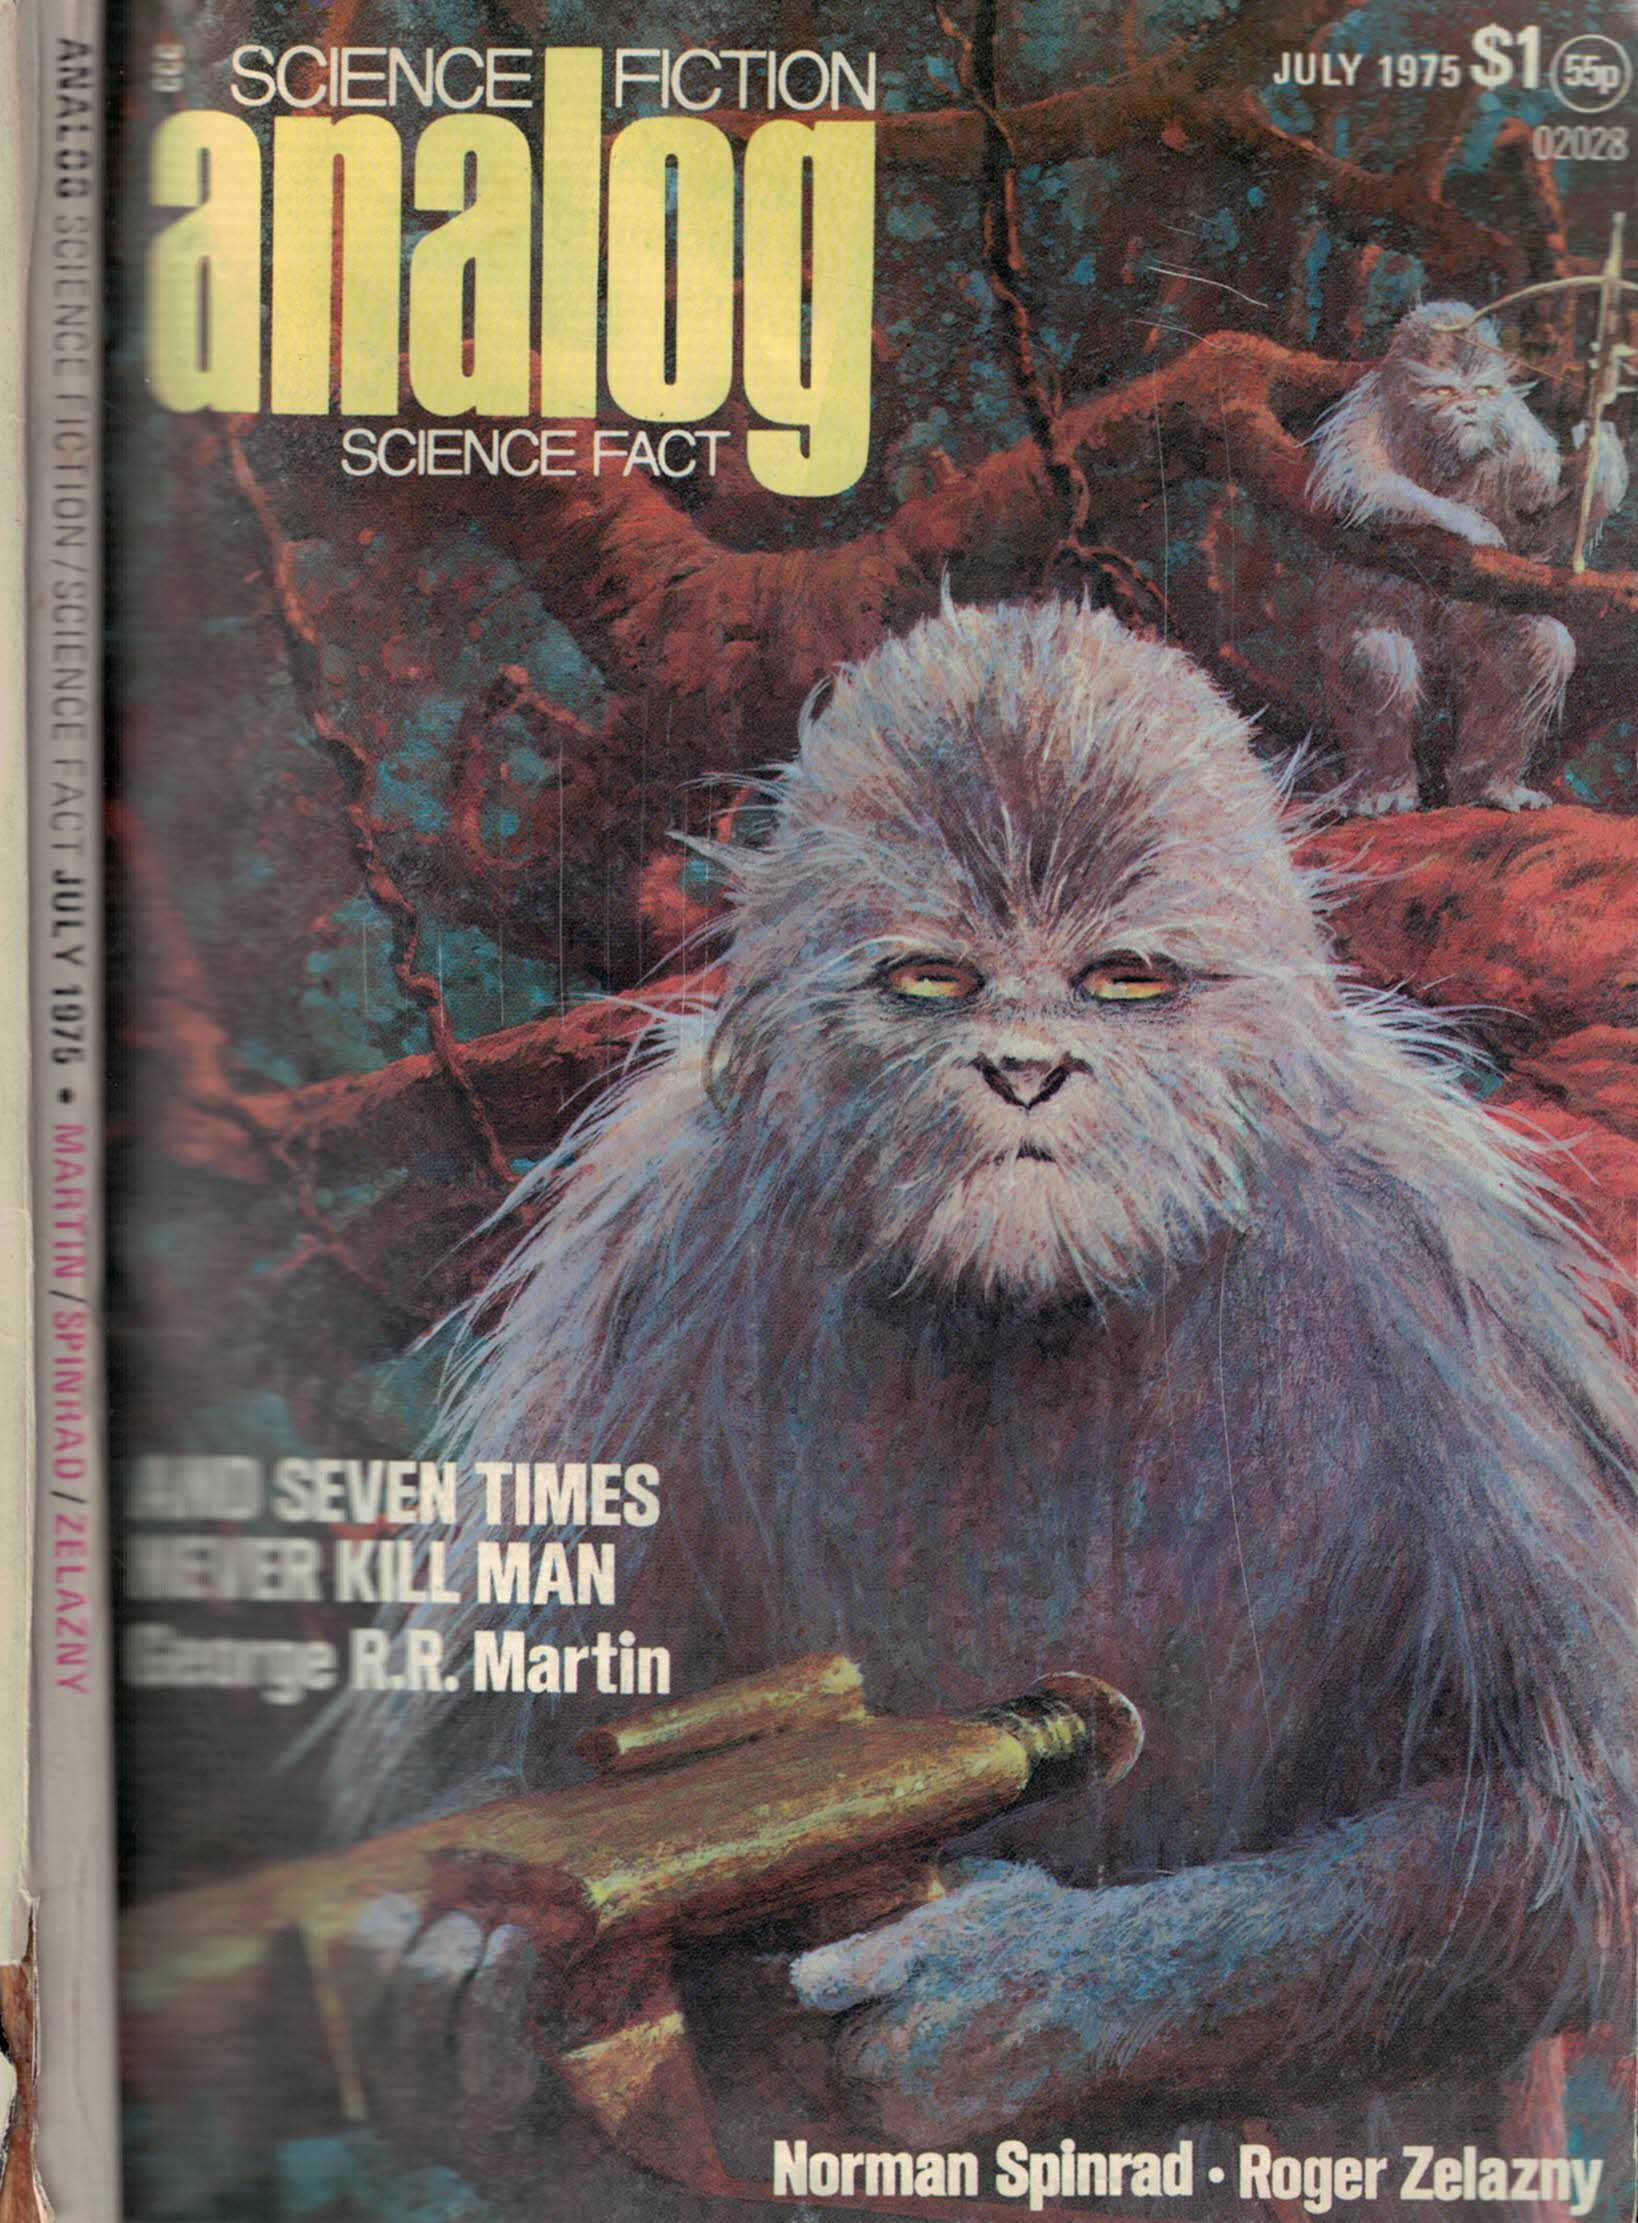 Analog. Science Fiction and Fact. Volume 95, Number 7. July 1975.